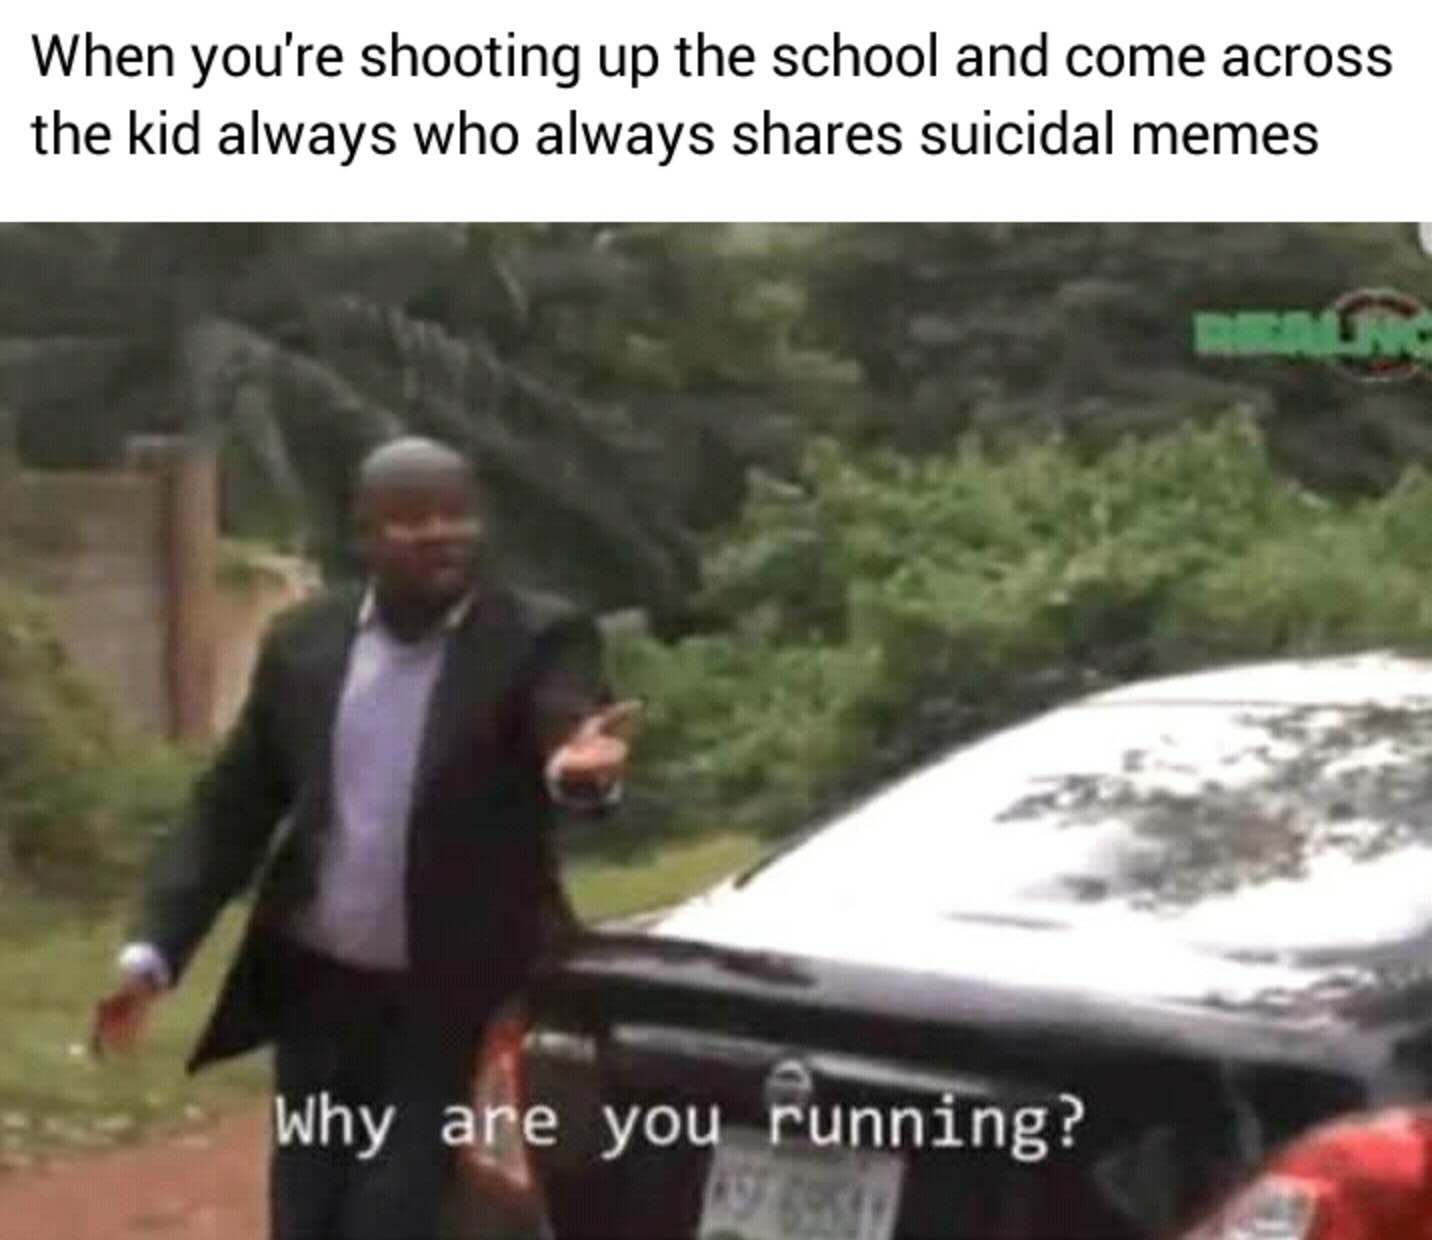 savage meme of a you re shooting up the school meme - When you're shooting up the school and come across the kid always who always suicidal memes Why are you running?